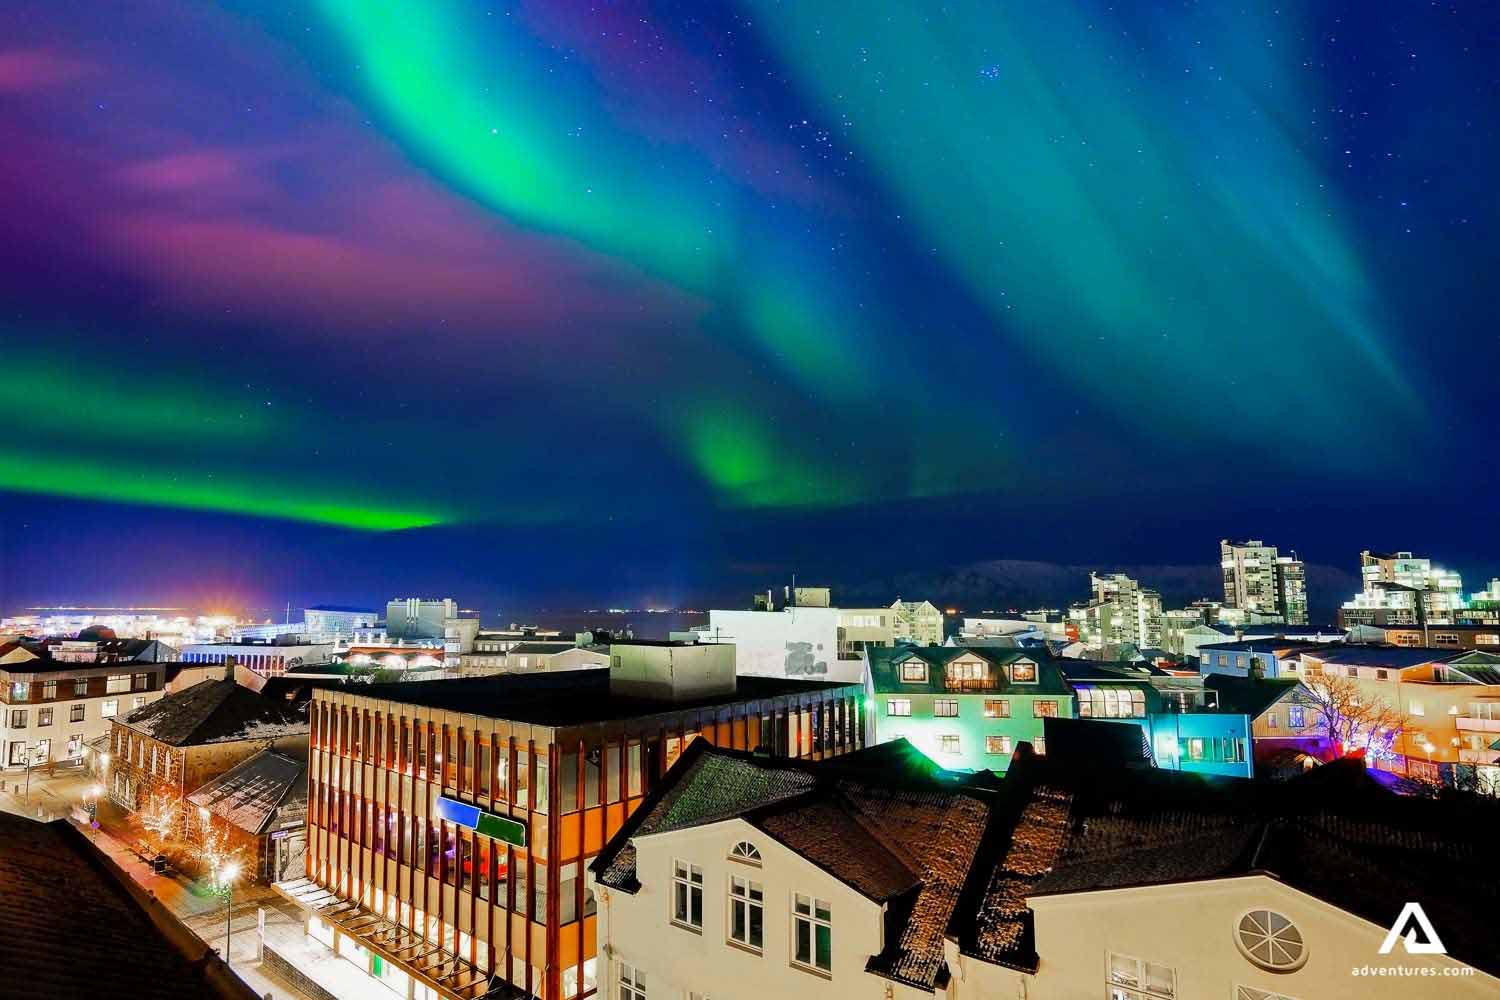 Guide to The Northern Lights in Reykjavik | Adventures.com